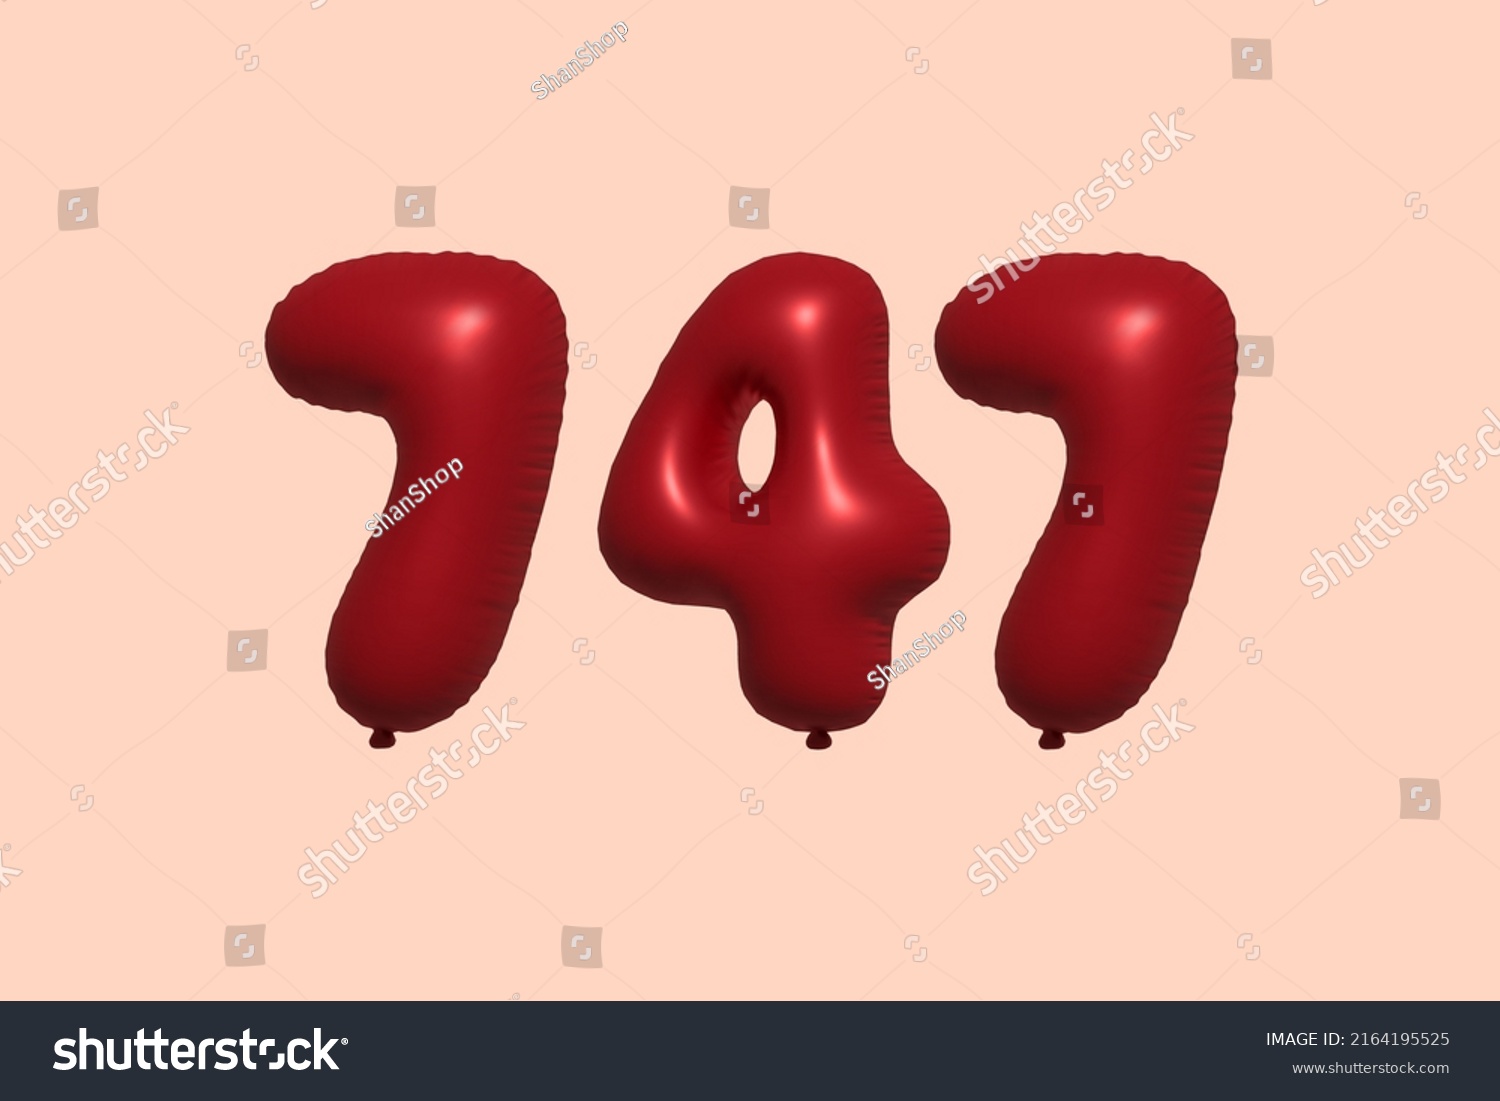 SVG of 747 3d number balloon made of realistic metallic air balloon 3d rendering. 3D Red helium balloons for sale decoration Party Birthday, Celebrate anniversary, Wedding Holiday. Vector illustration svg